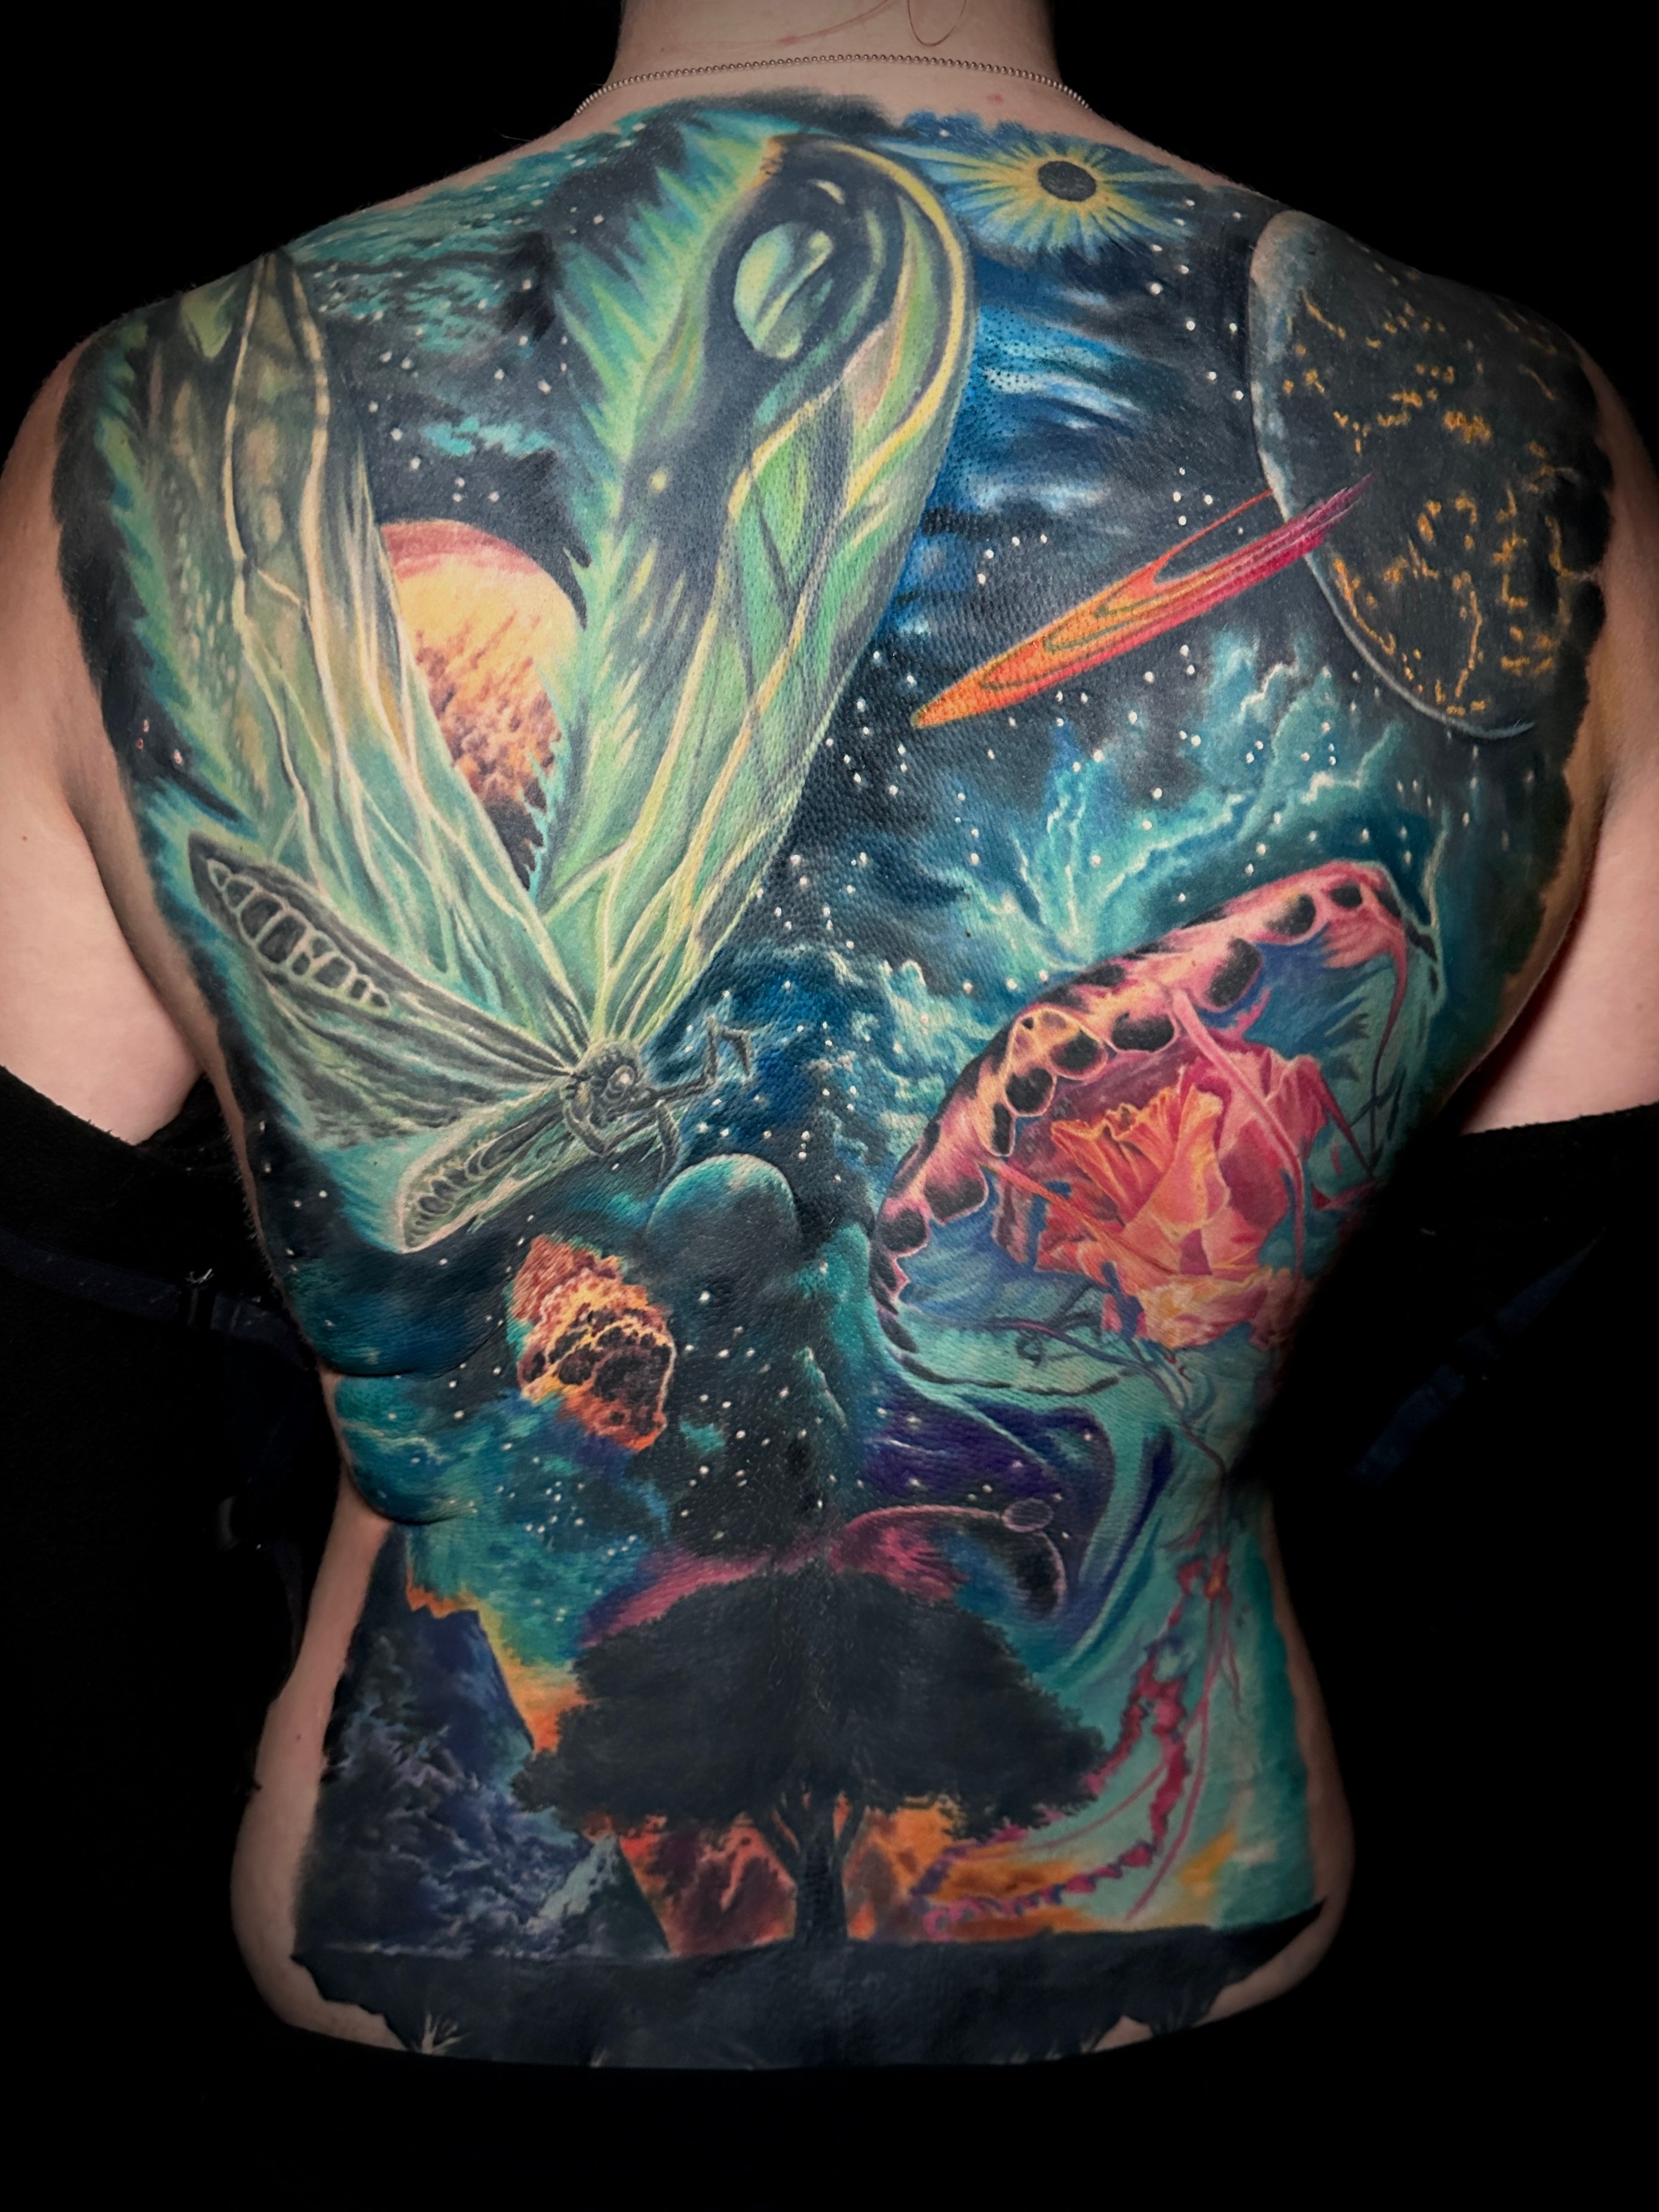 1/2 done galaxy cover up by AL at Stones in Northampton, MA : r/tattoos